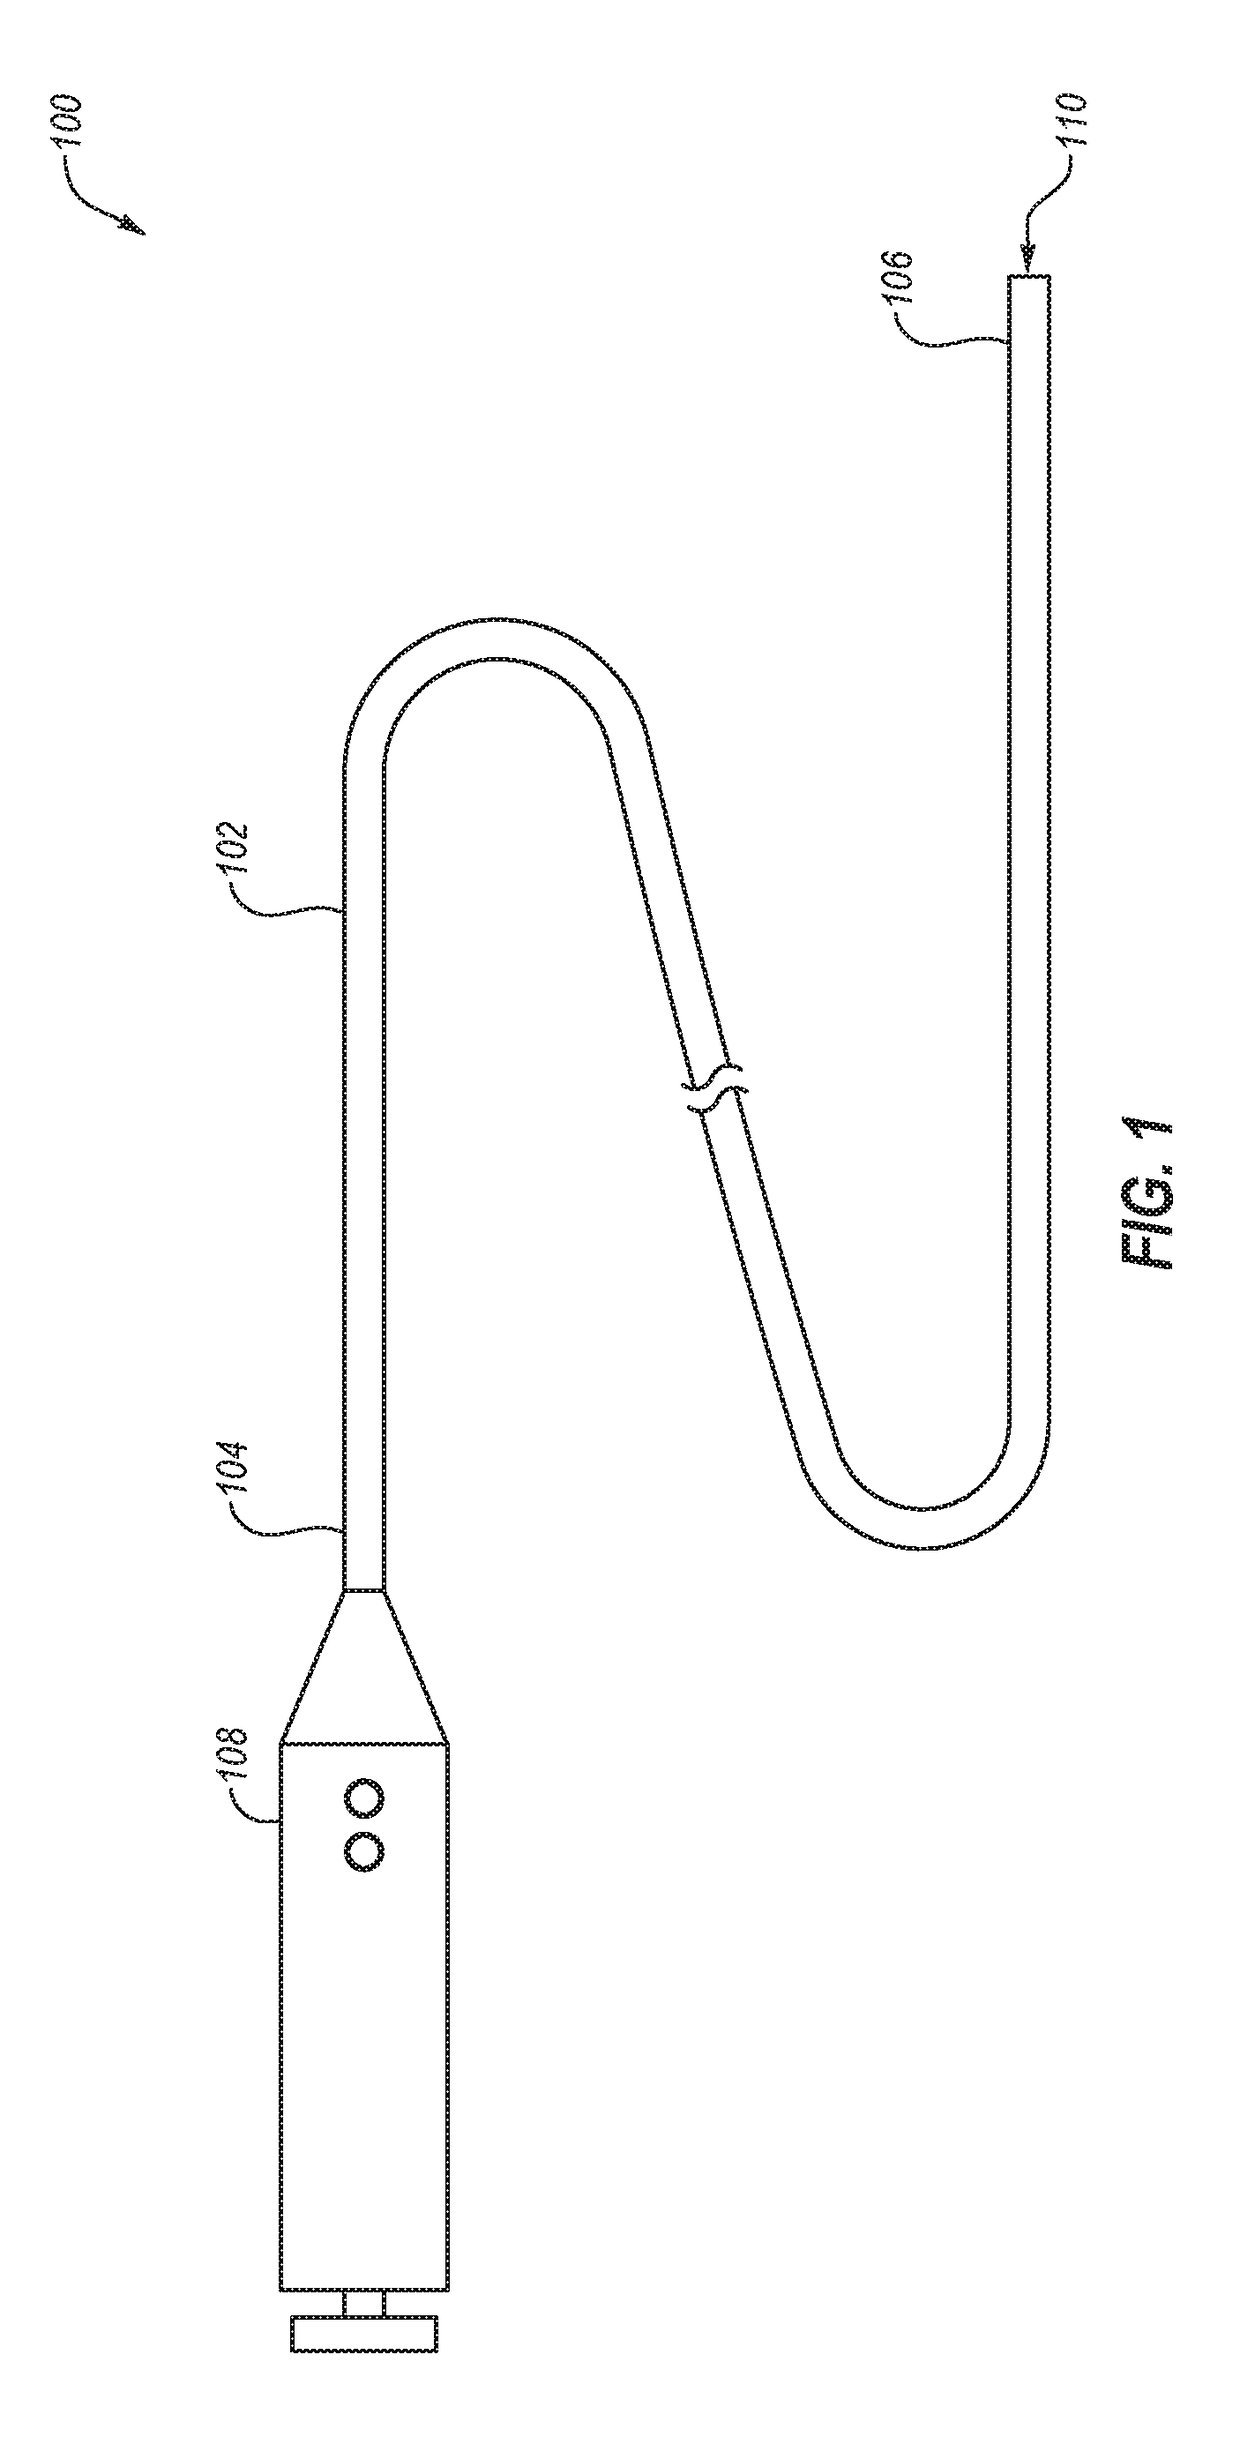 Combination steerable catheter and systems